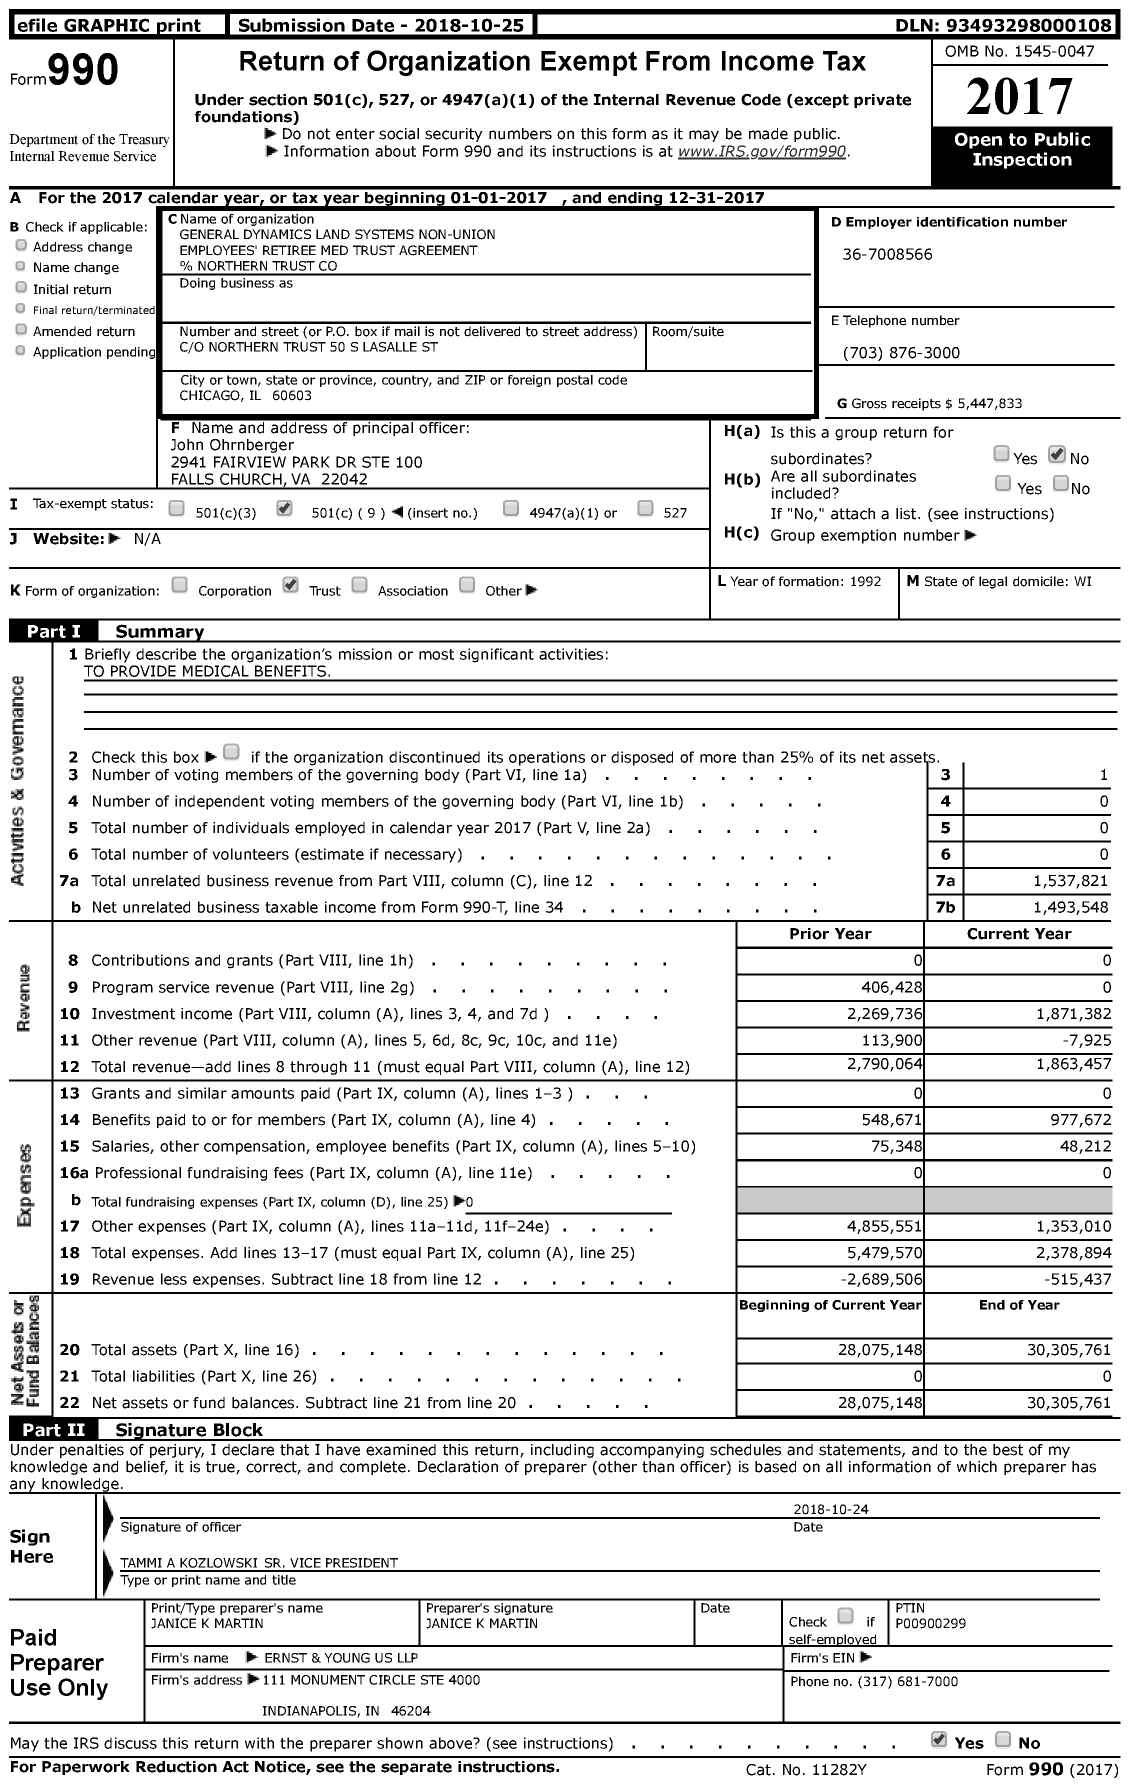 Image of first page of 2017 Form 990 for General Dynamics Land Systems Non-Union Employees' Retiree Benefits Trust Agreement